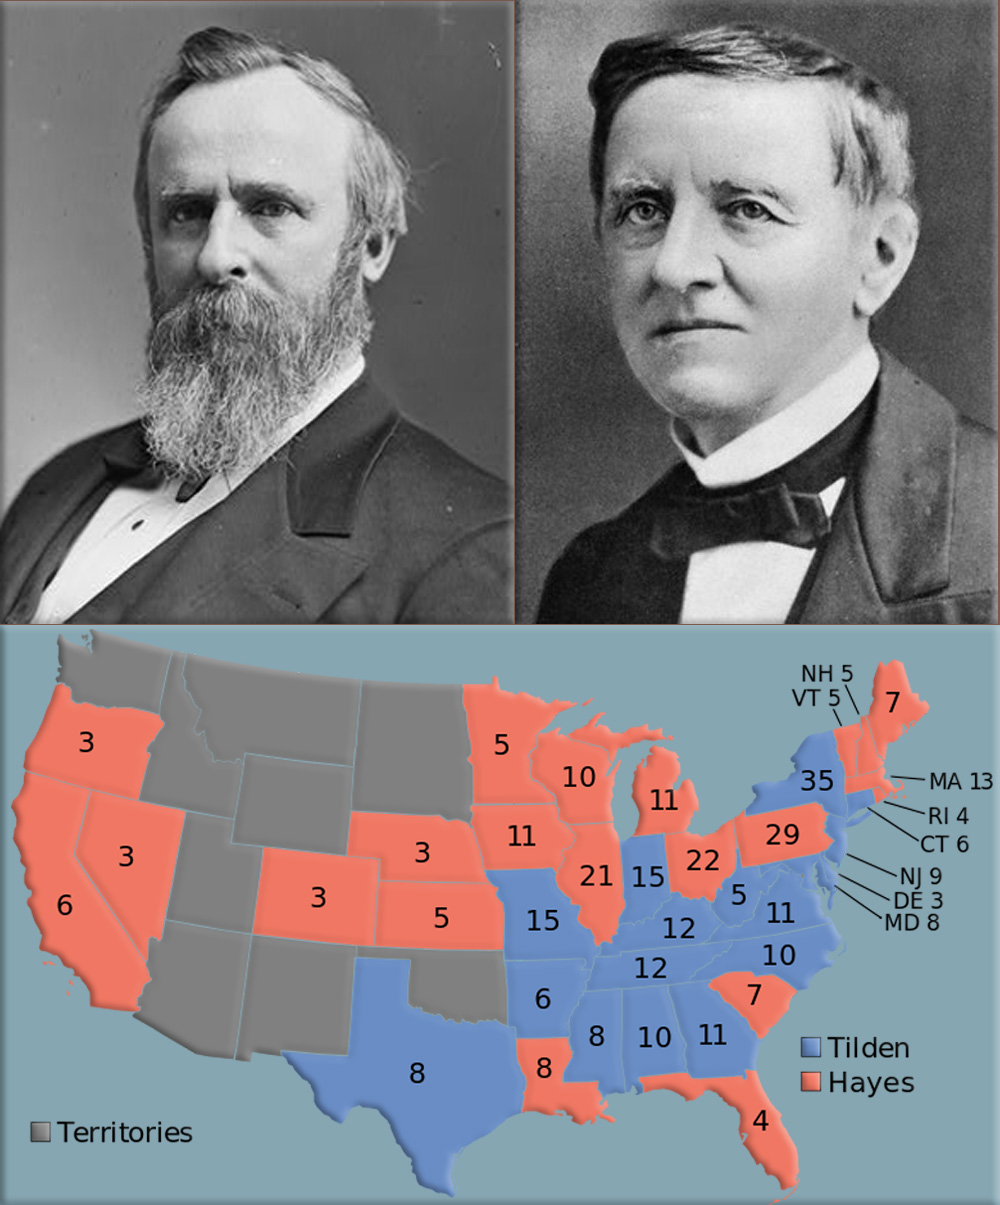 U.S. presidential election, 1876: Just two days before inauguration, the U.S. Congress declares Rutherford B. Hayes the winner of the election even though Samuel J. Tilden had won the popular vote on November 7, 1876